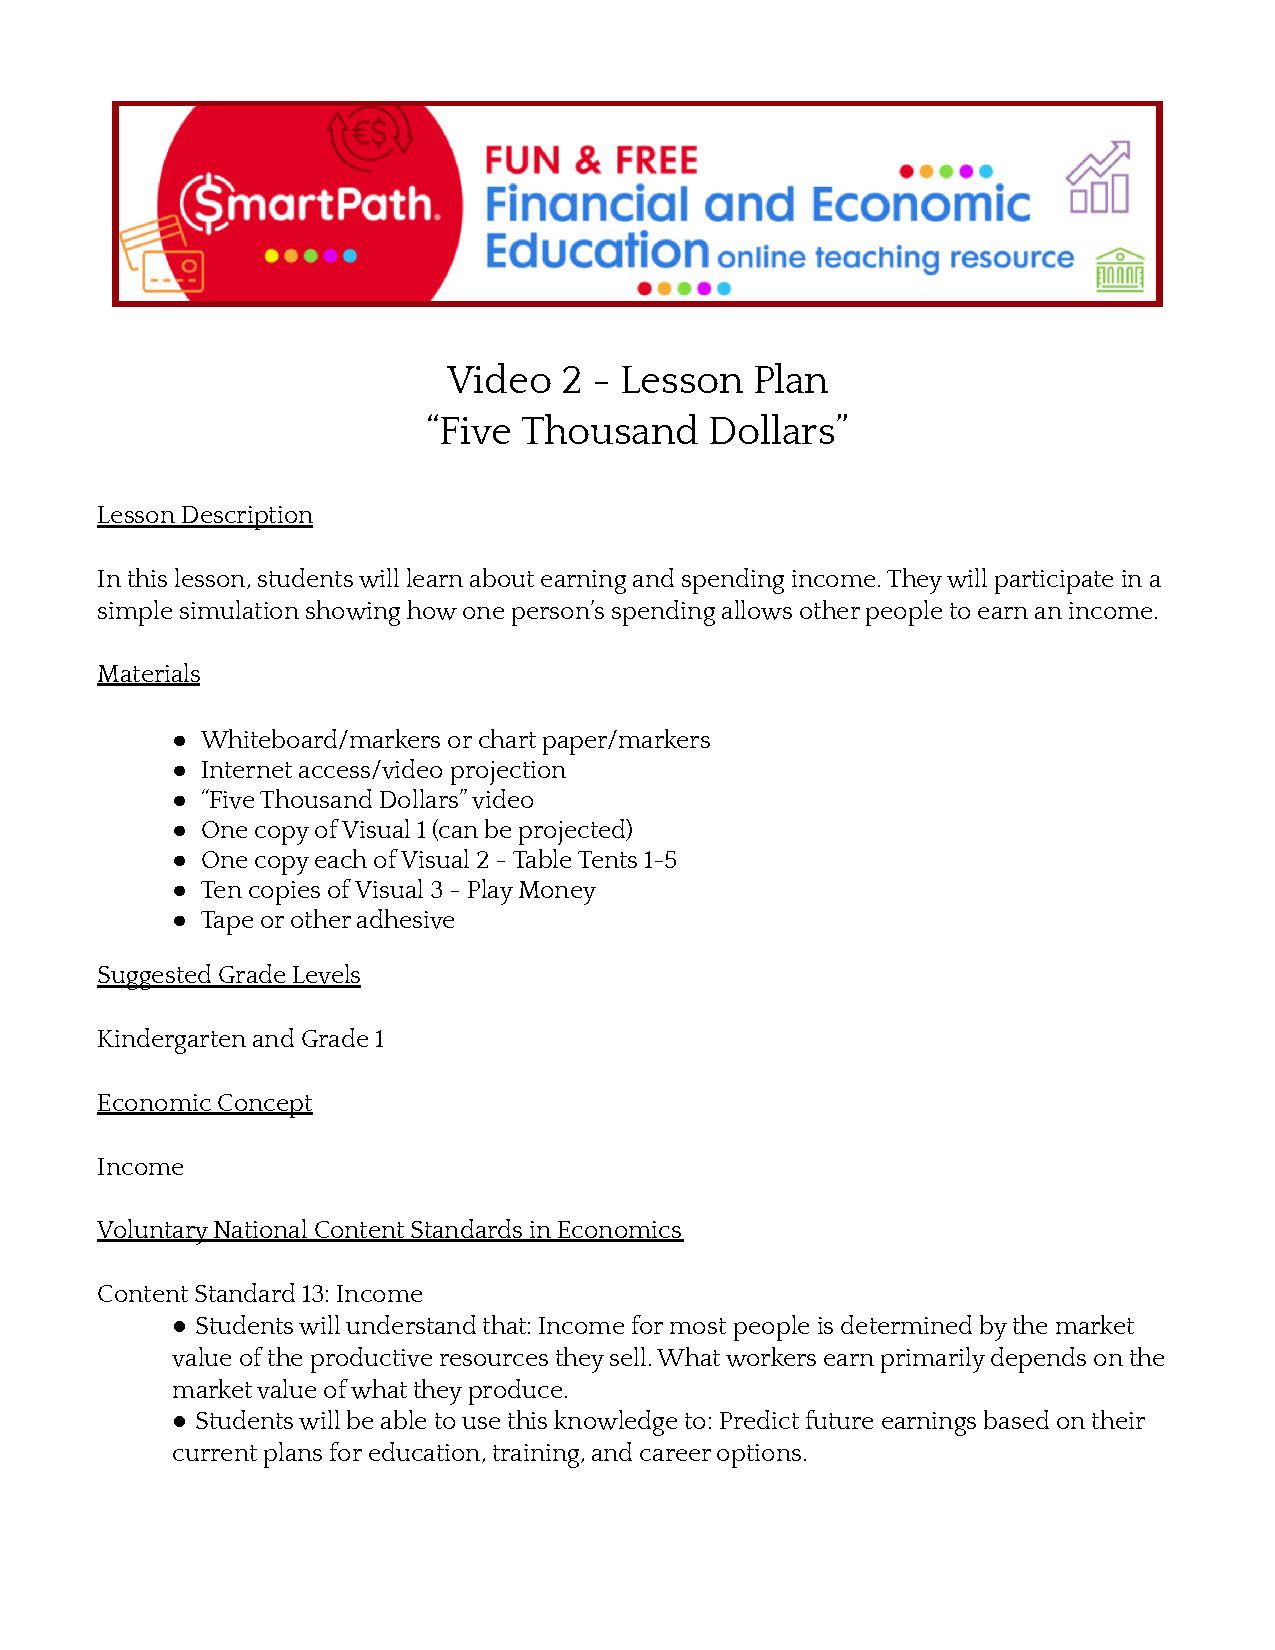 Lesson plan about earnings, spending, and budgets